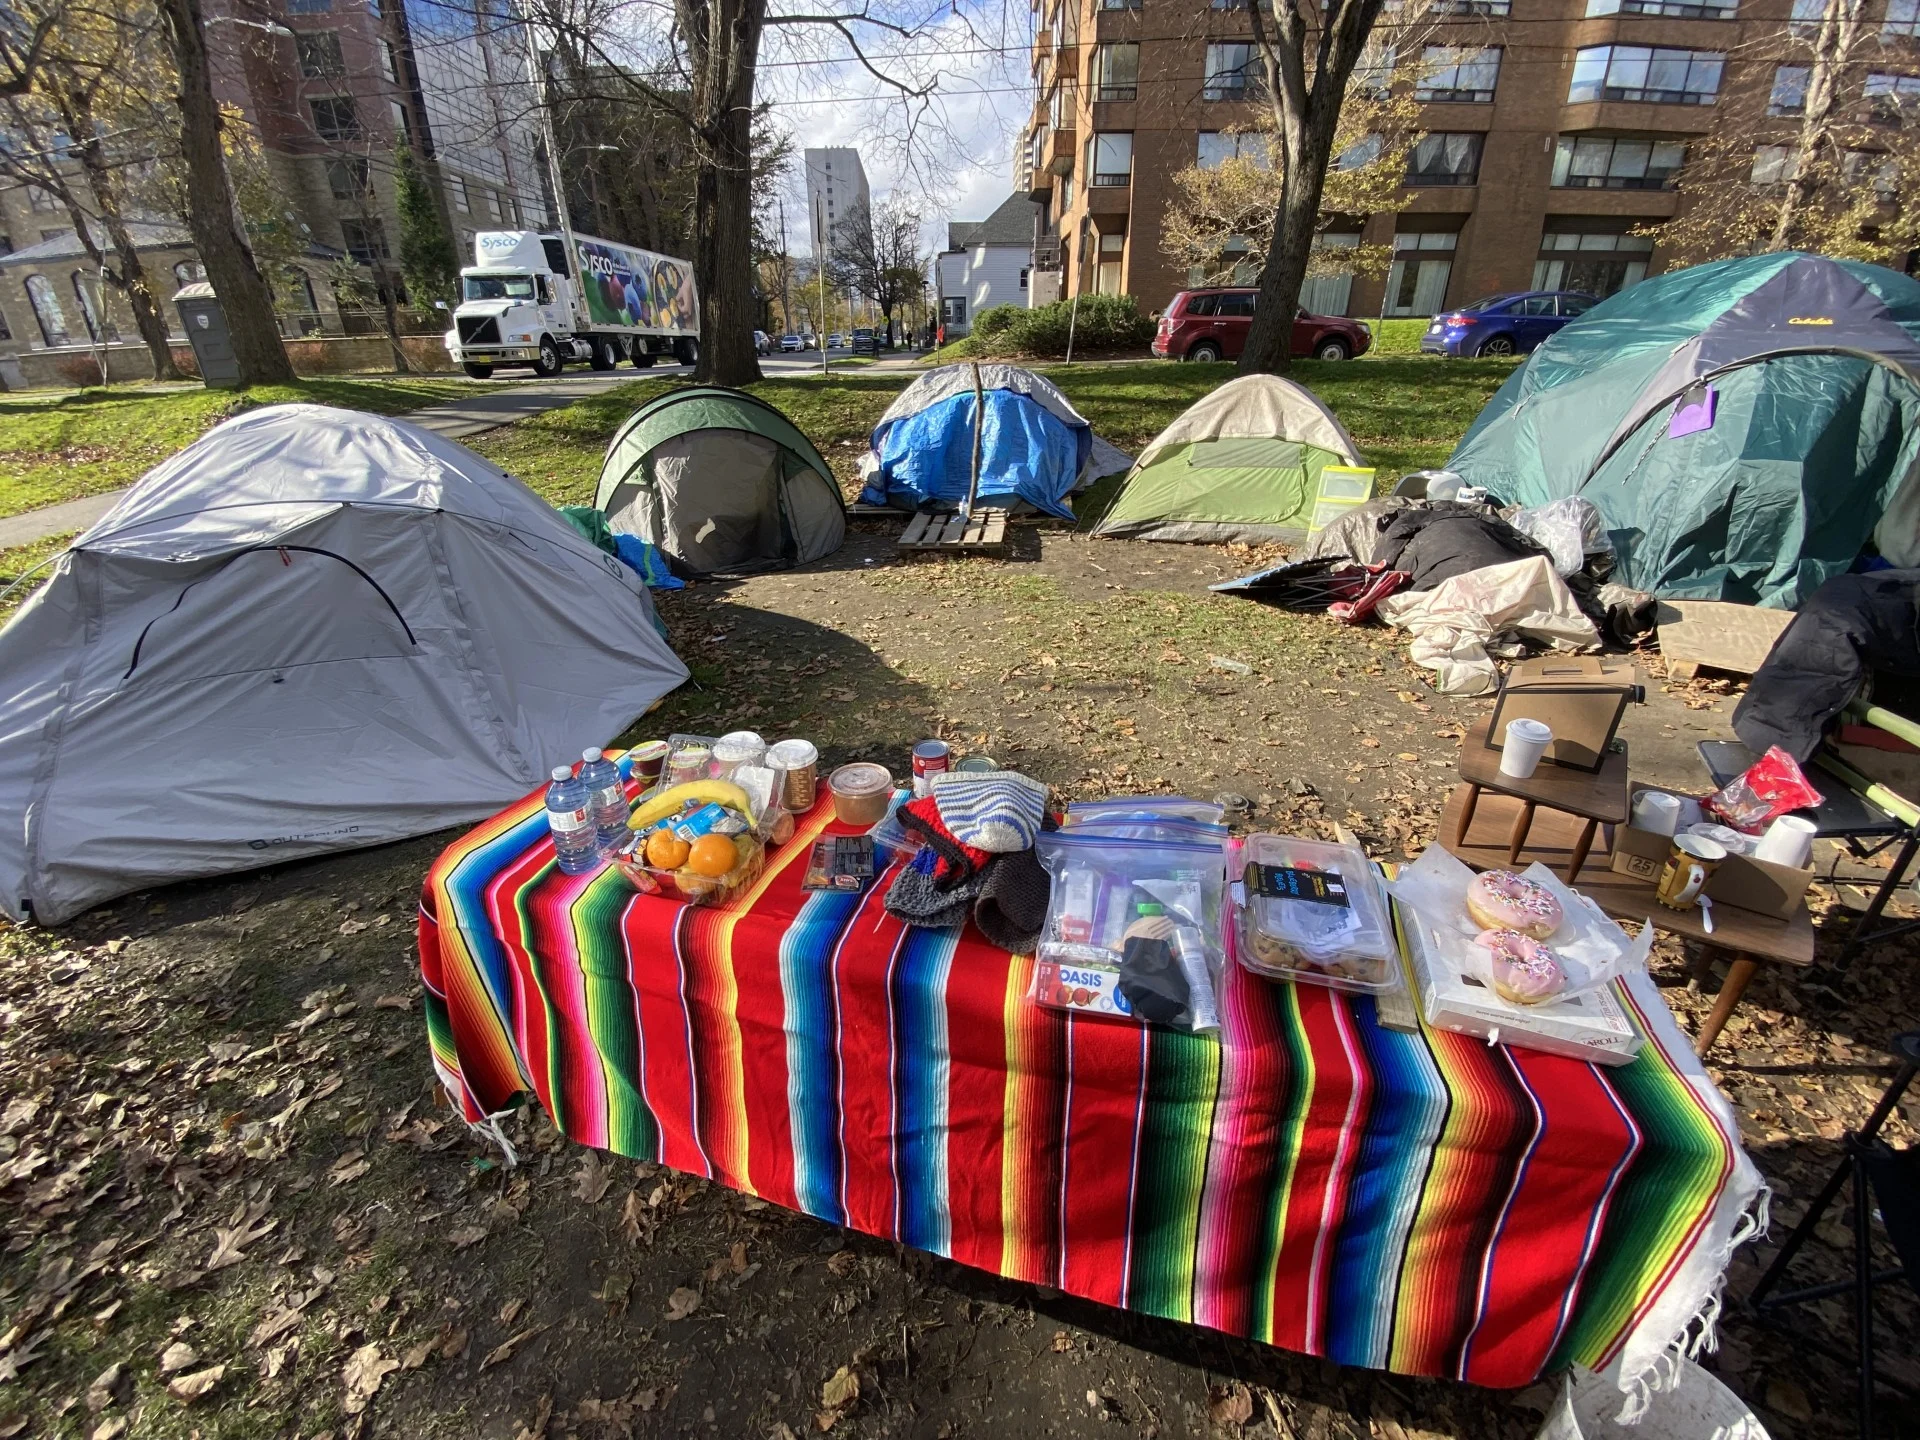 As winter creeps closer, unhoused communities in Halifax brace for cold